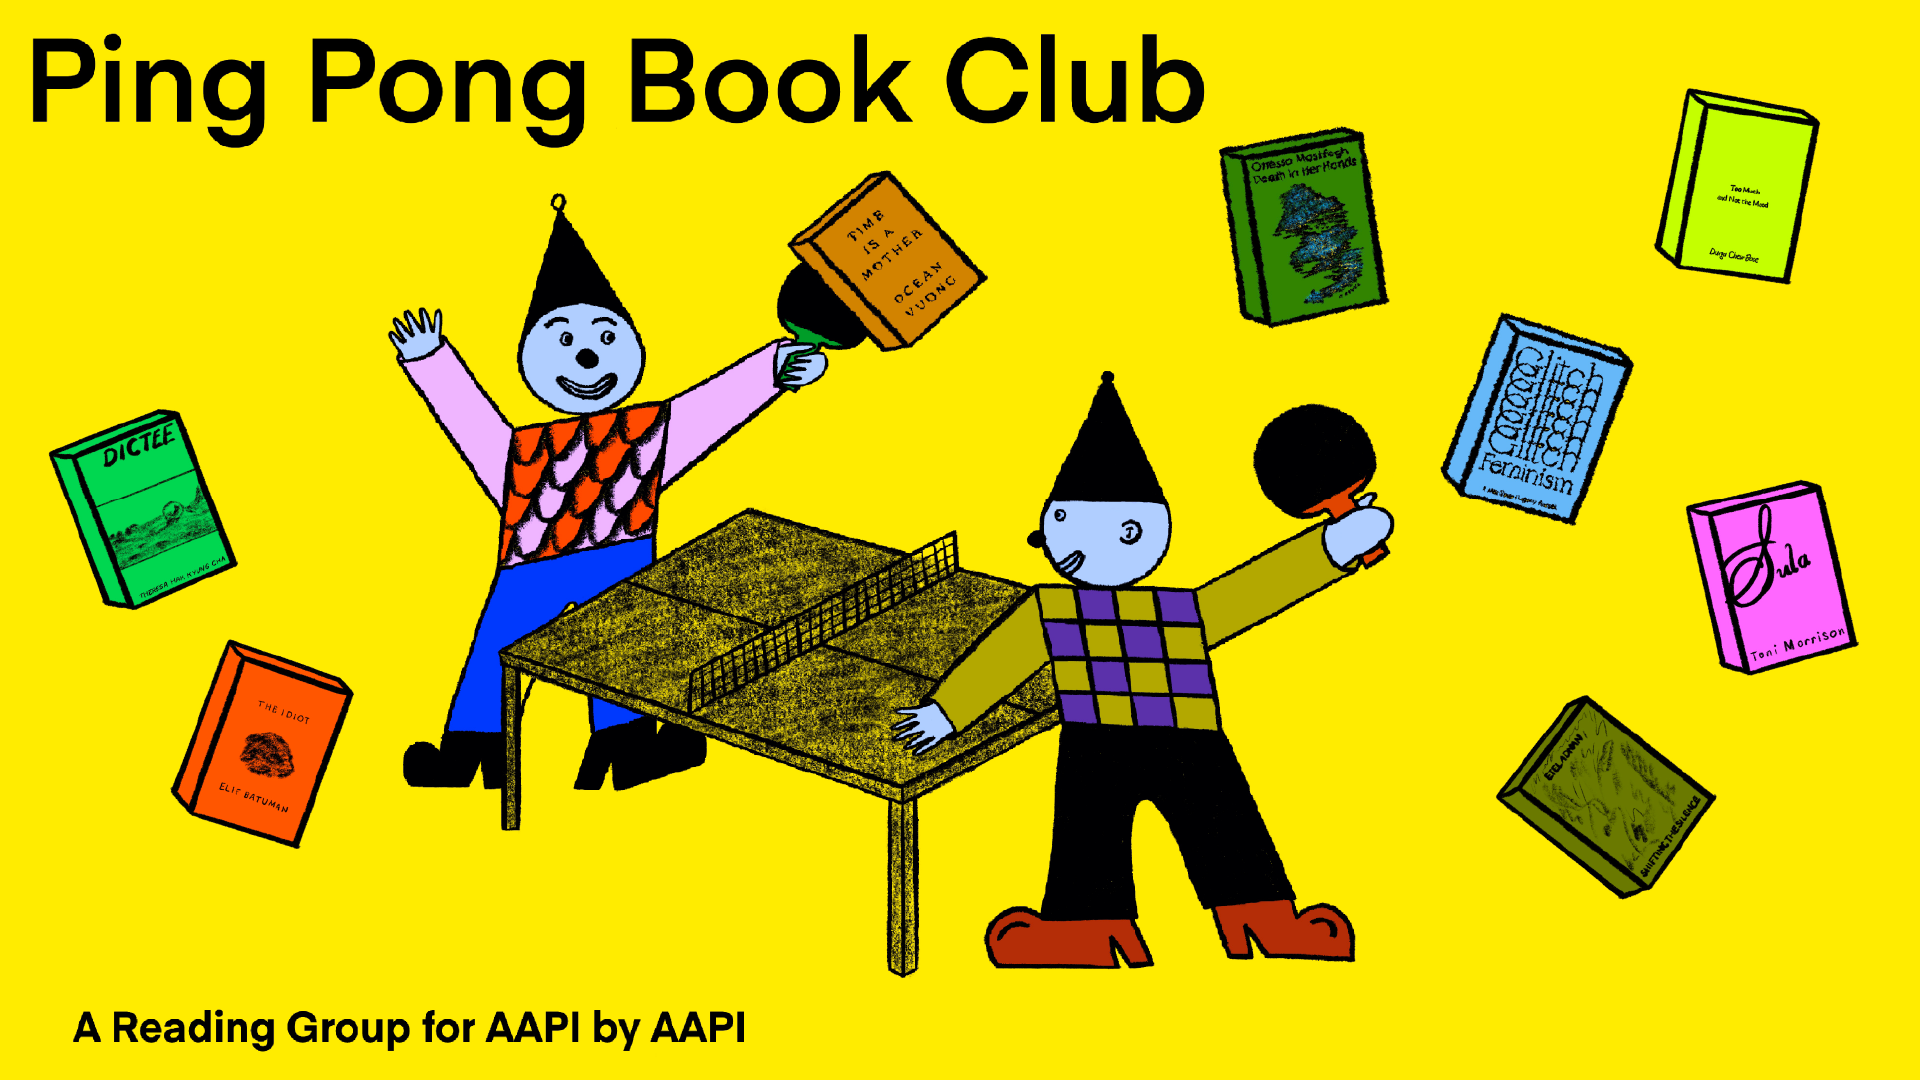 Promotional banner with bright yellow background, brightly colored illustration of two clowns at a ping pong table with eight books floating around them, with text in bold sans-serif black font that reads 